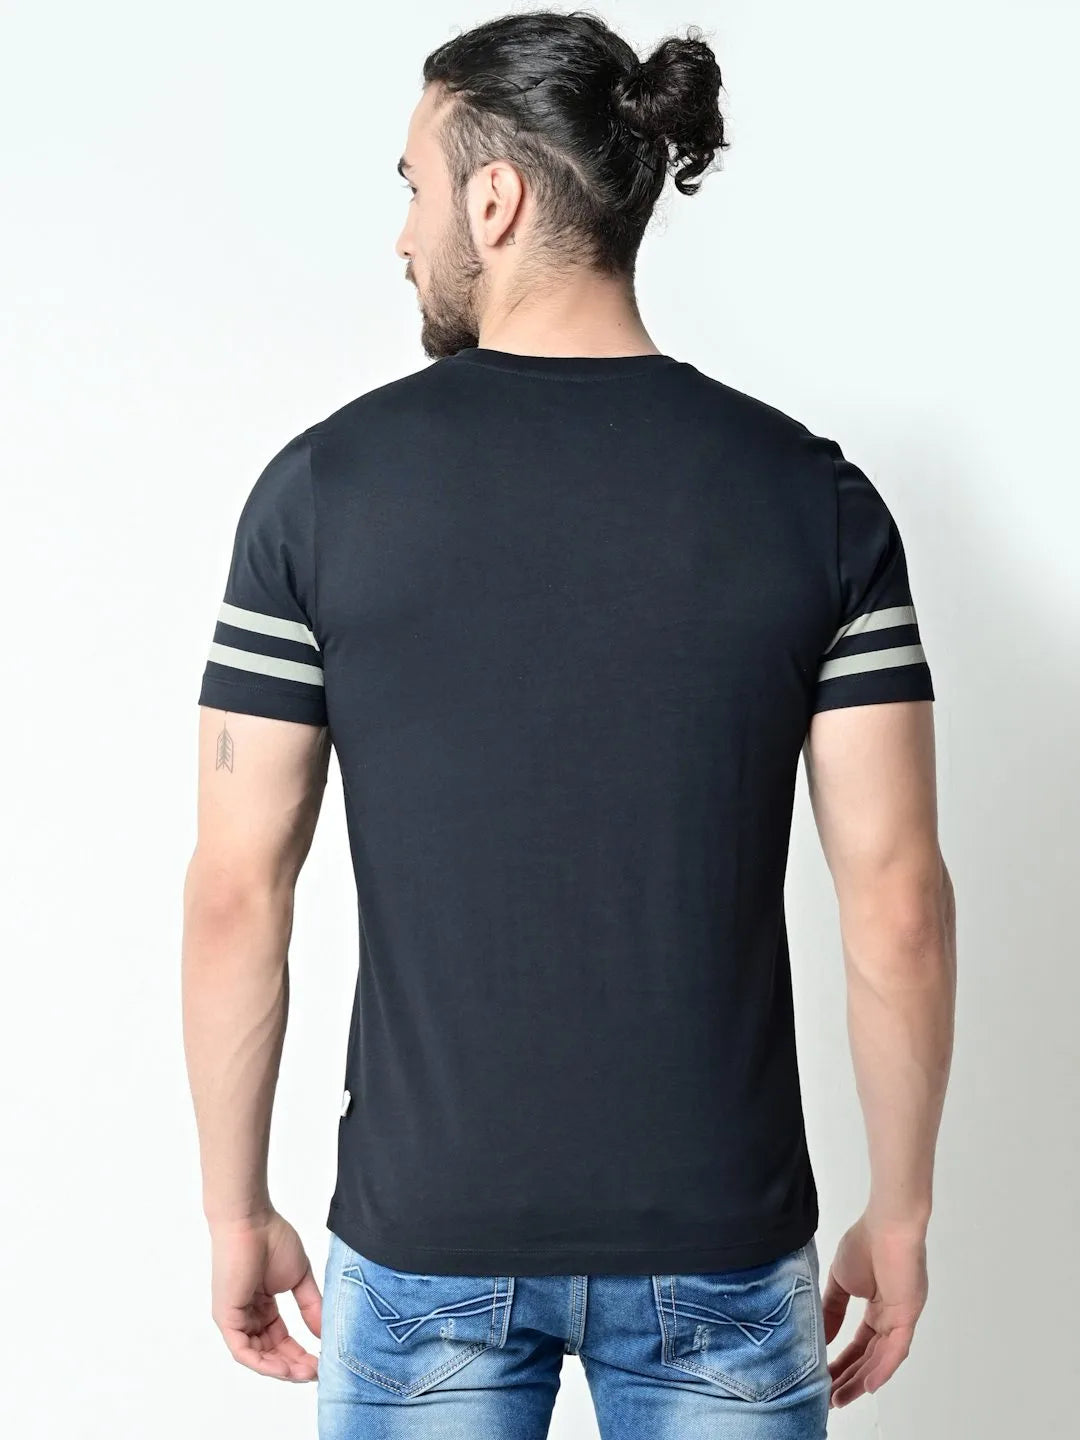 Innocent Cotton T-shirt (Black) Being Flawless